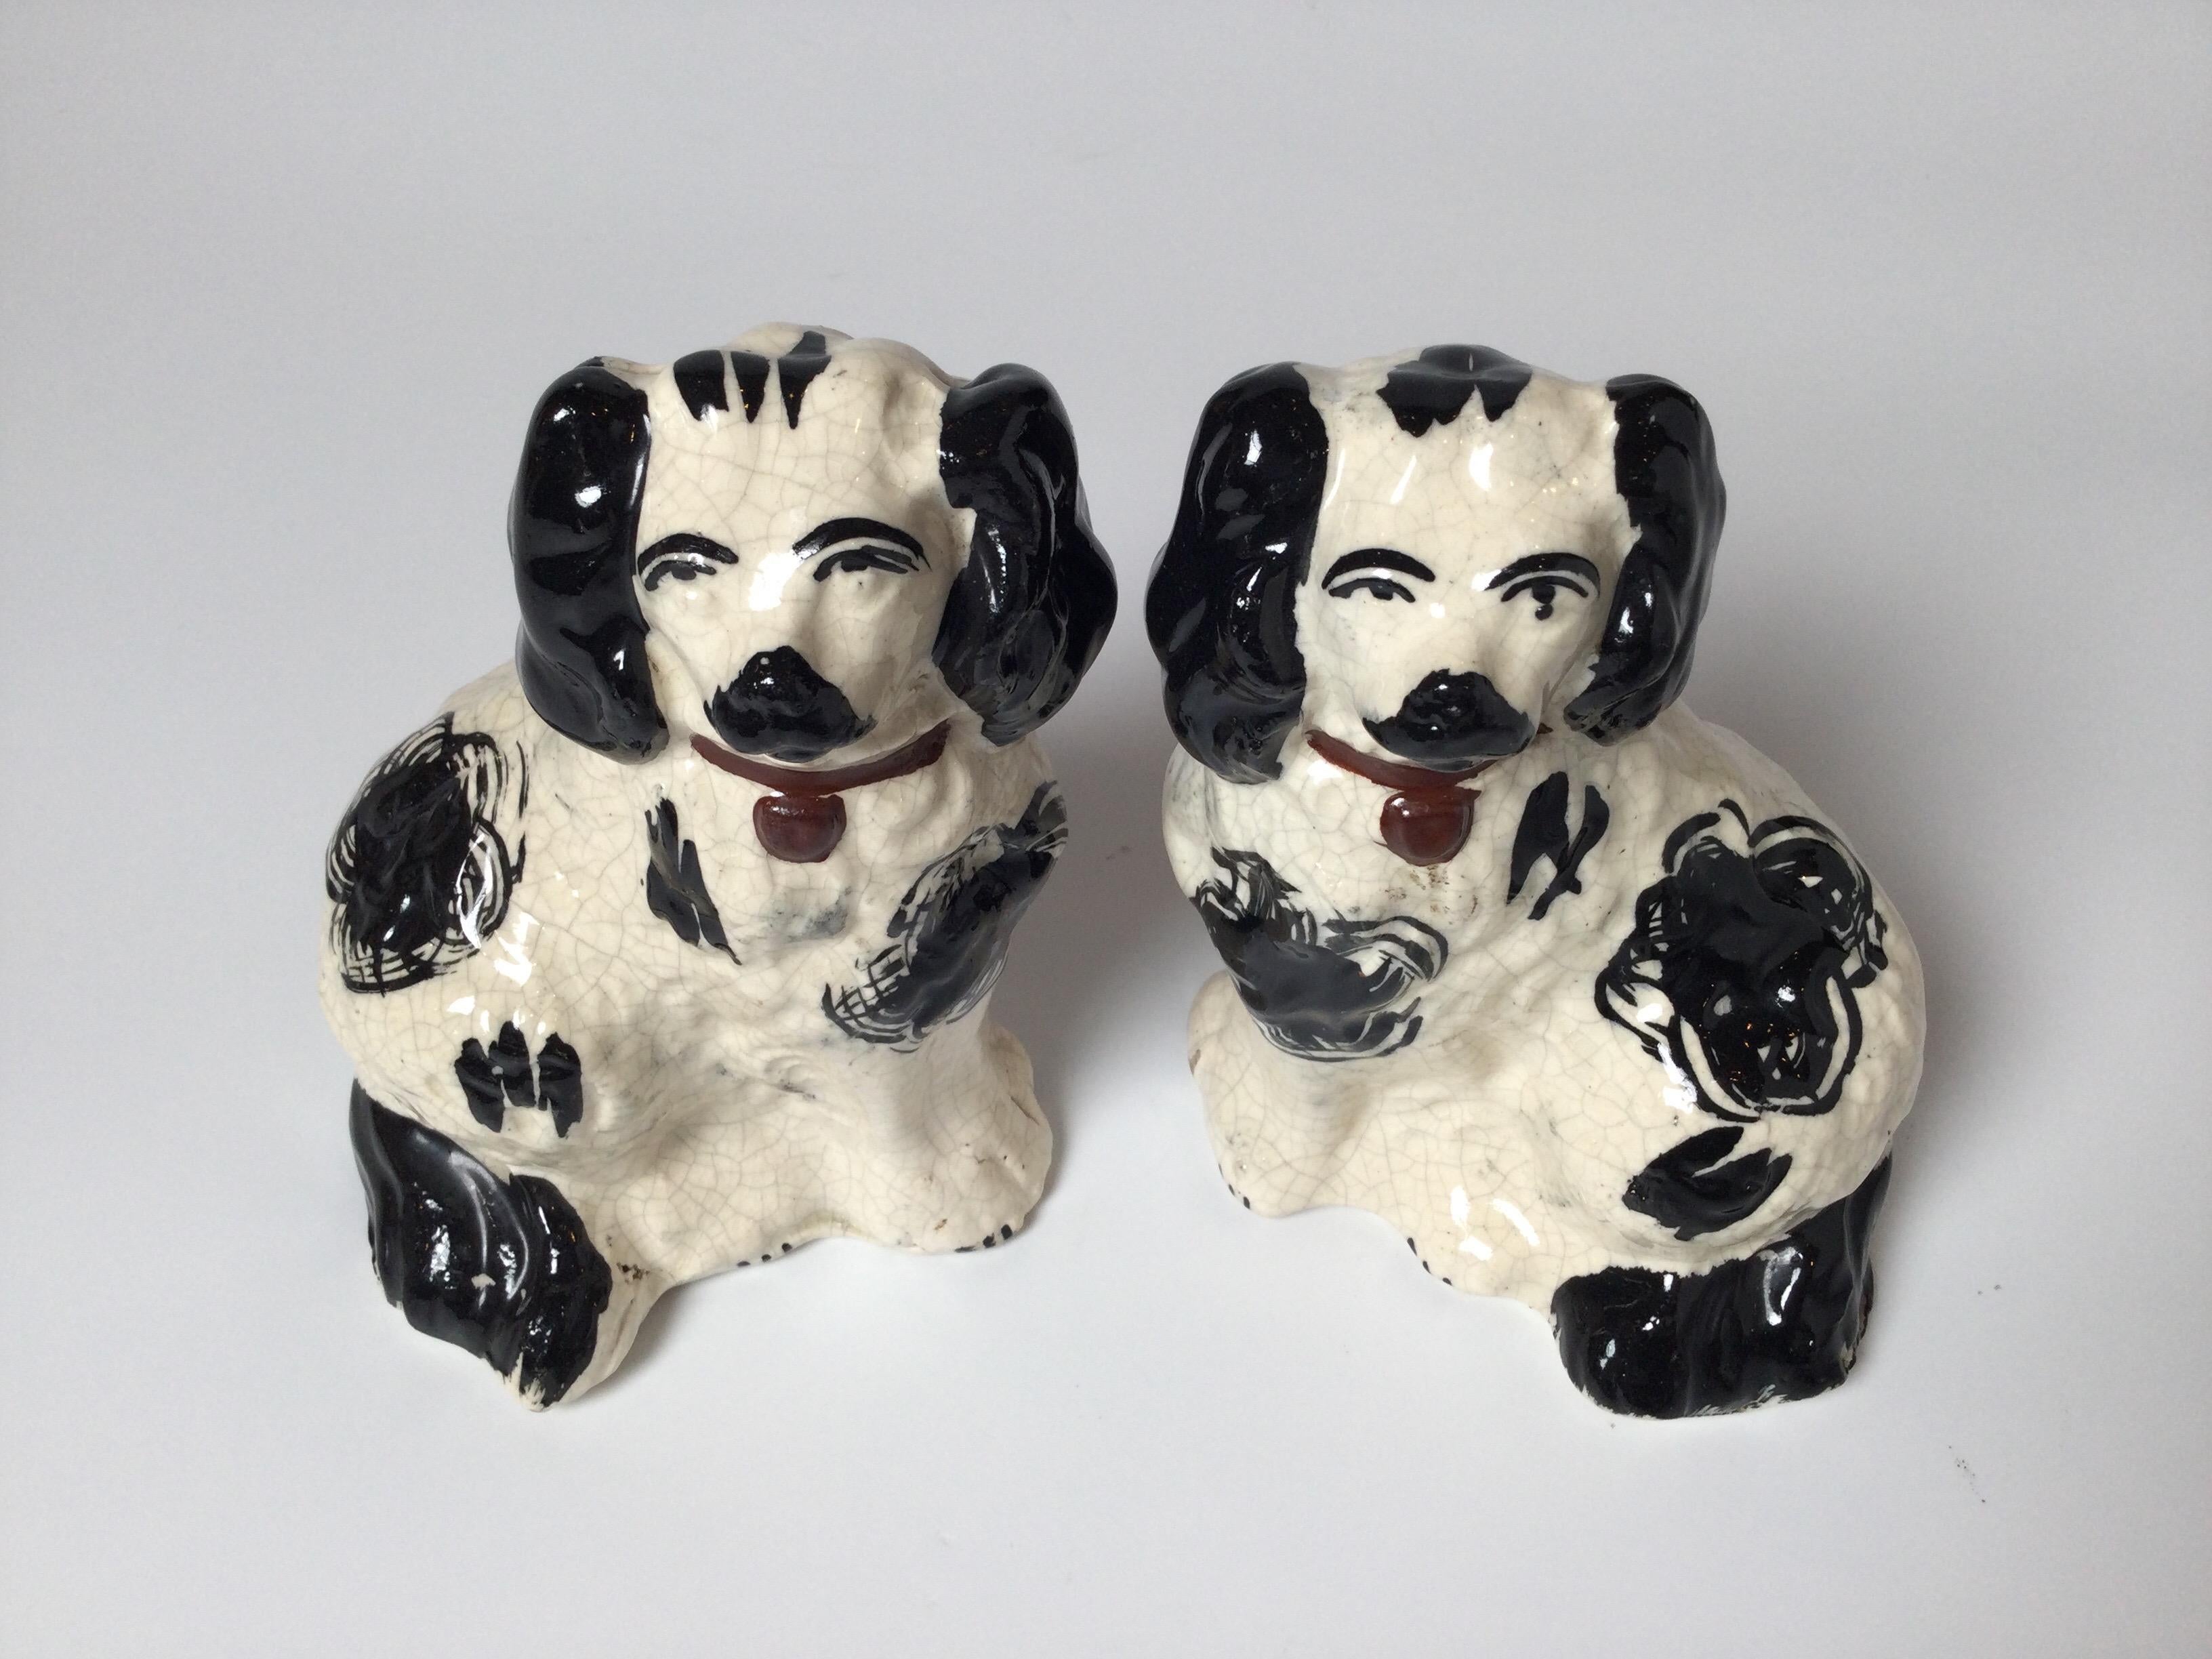 A pair of antique English Staffordshire blak and white spaniels. Measure: 6” tall.